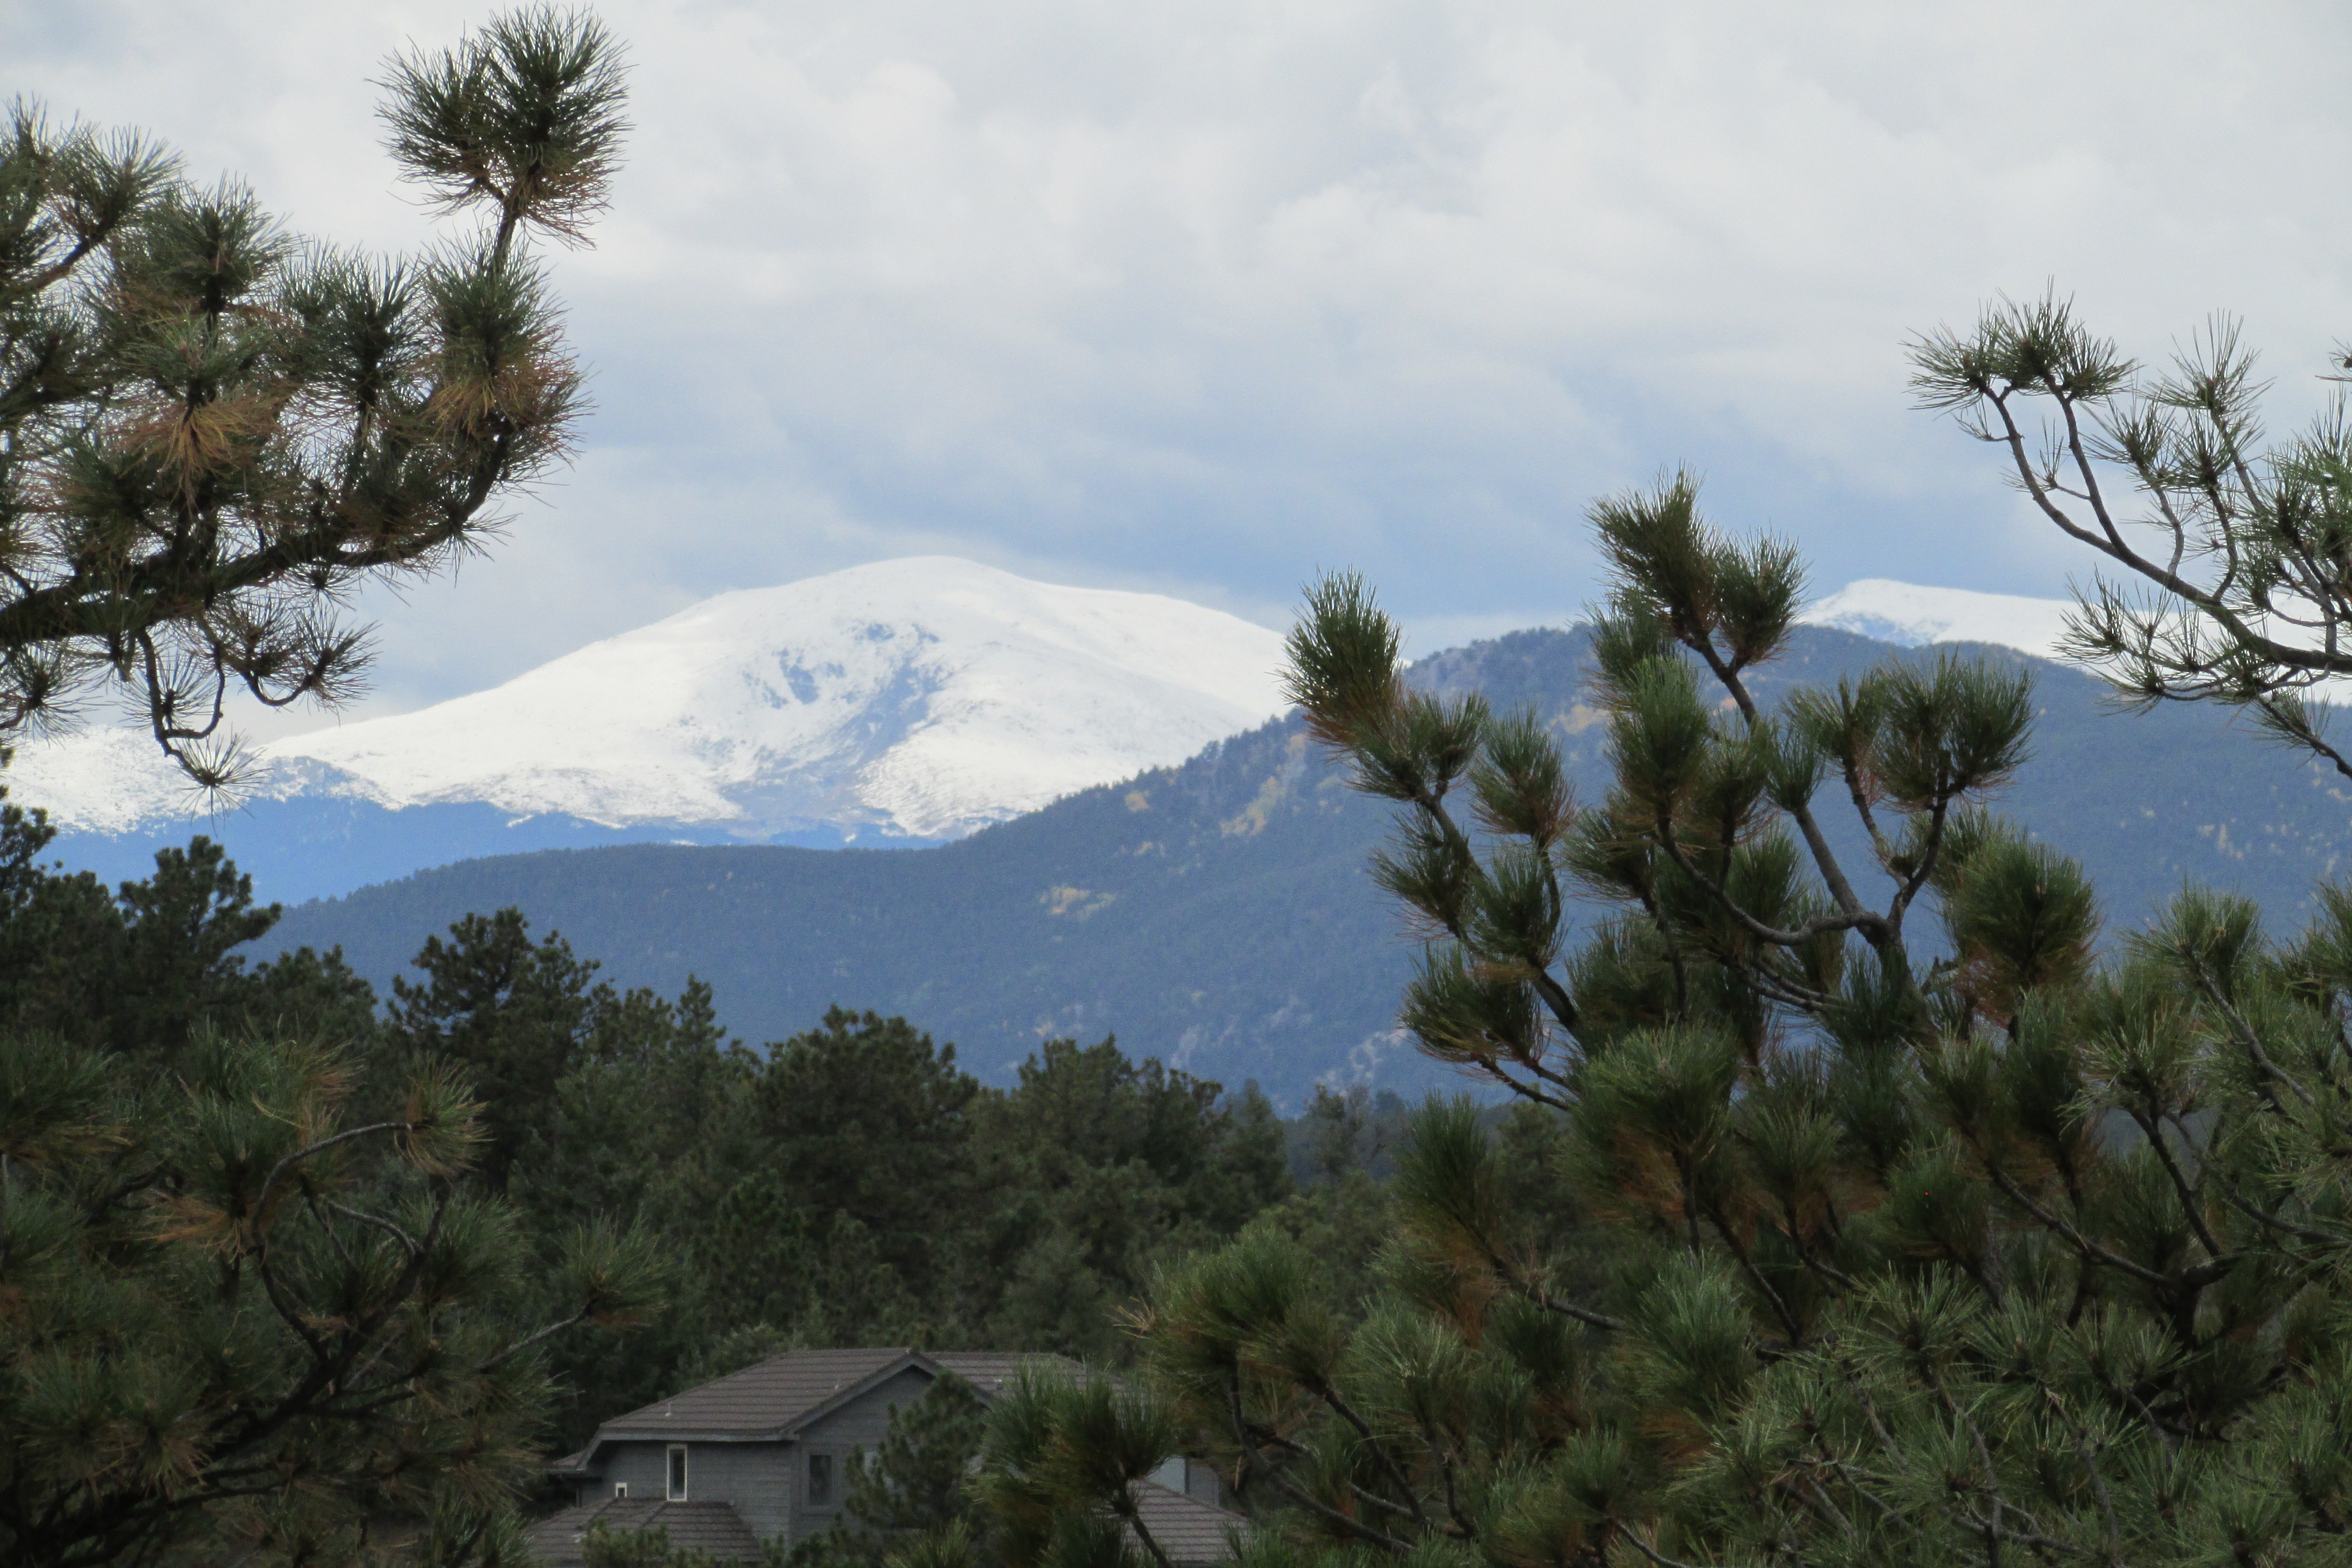 Photo of snow-capped Mount Evans rising up in the distance against a cloudy gray sky, as seen through the trees at the Lookout Mountain Nature Center